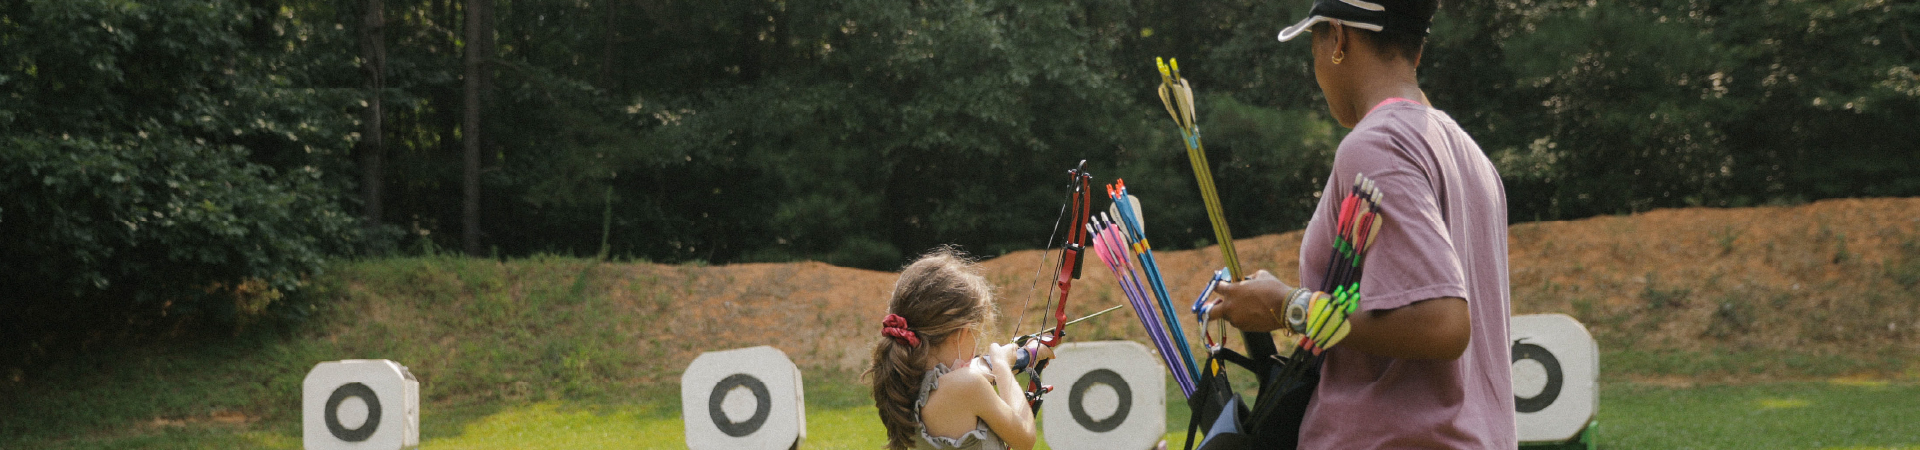  women in mauve shirt holding archery arrows for young girl shooting archery 